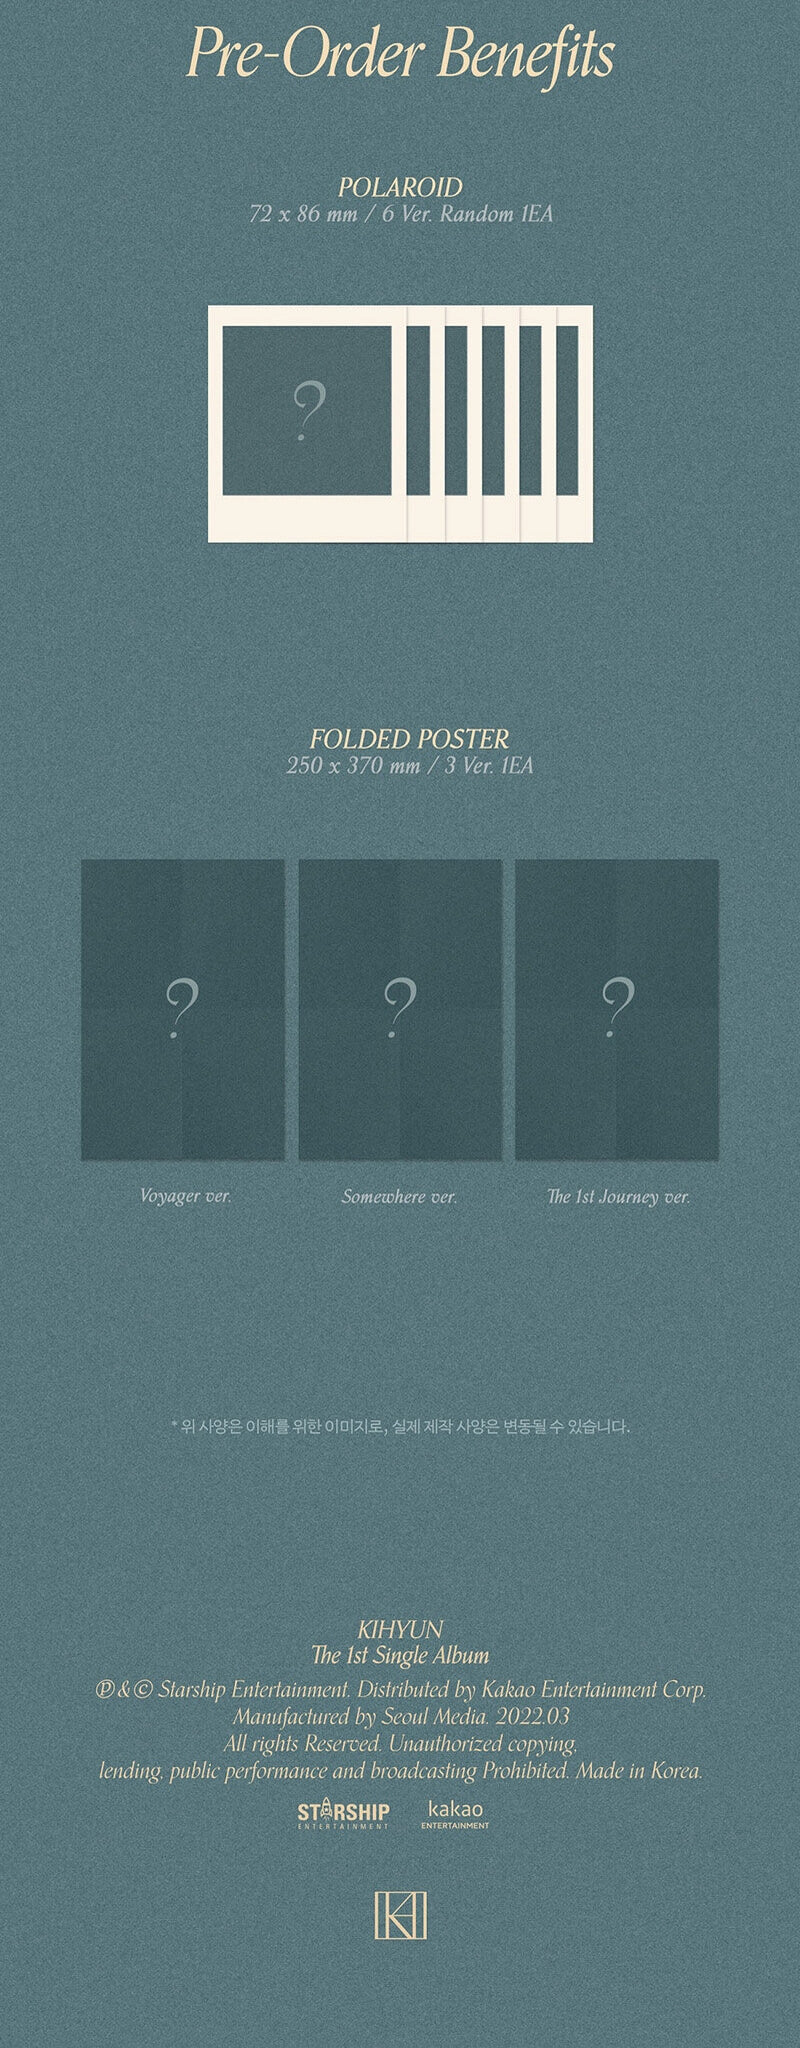 Kihyun 1st Single Album VOYAGER Inclusions Pre-order Only Benefits Polaroid Folded Poster